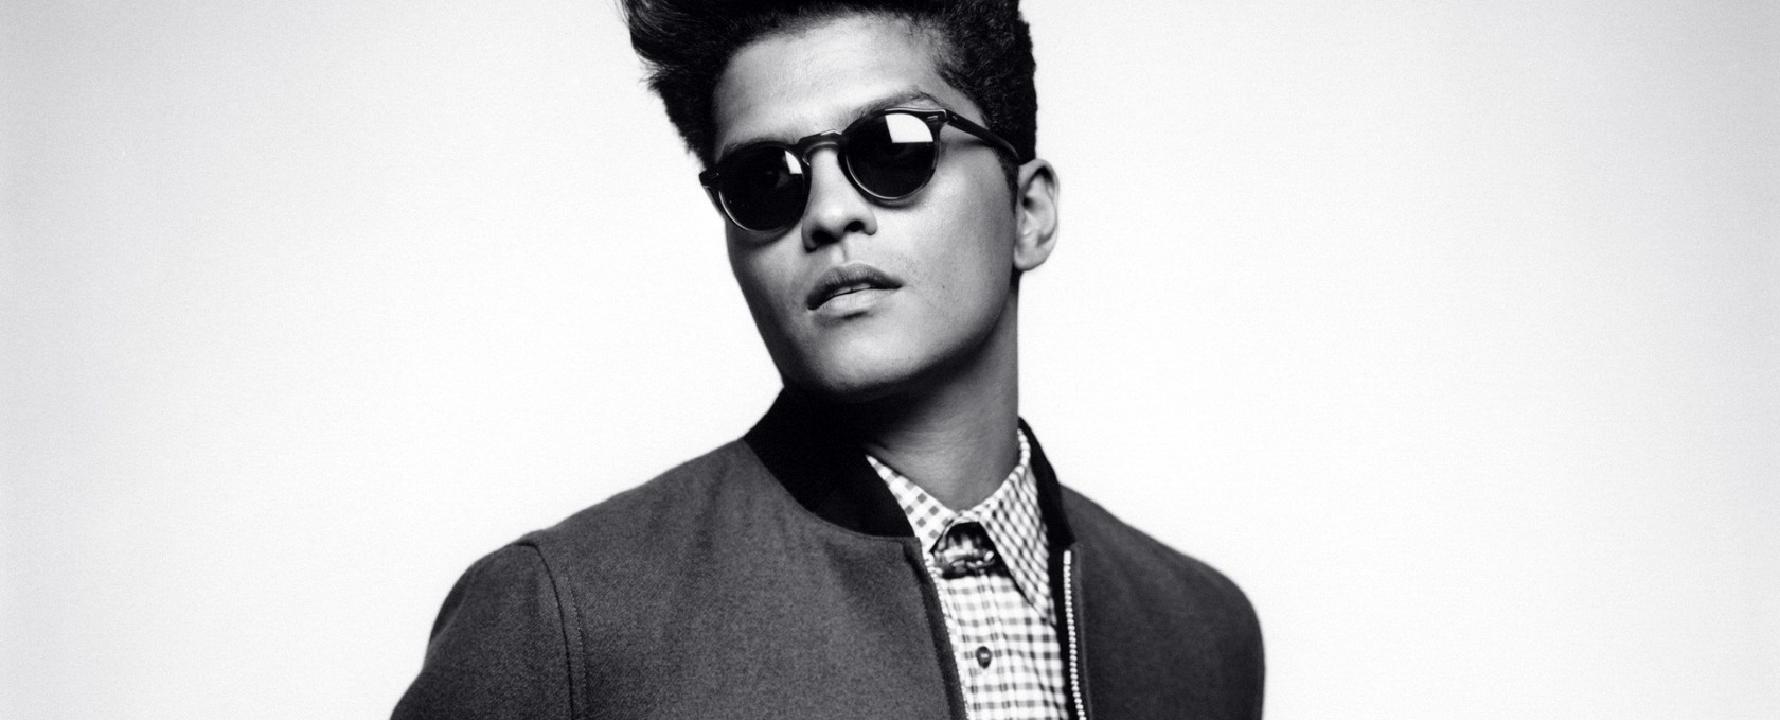 Promotional photograph of Bruno Mars.